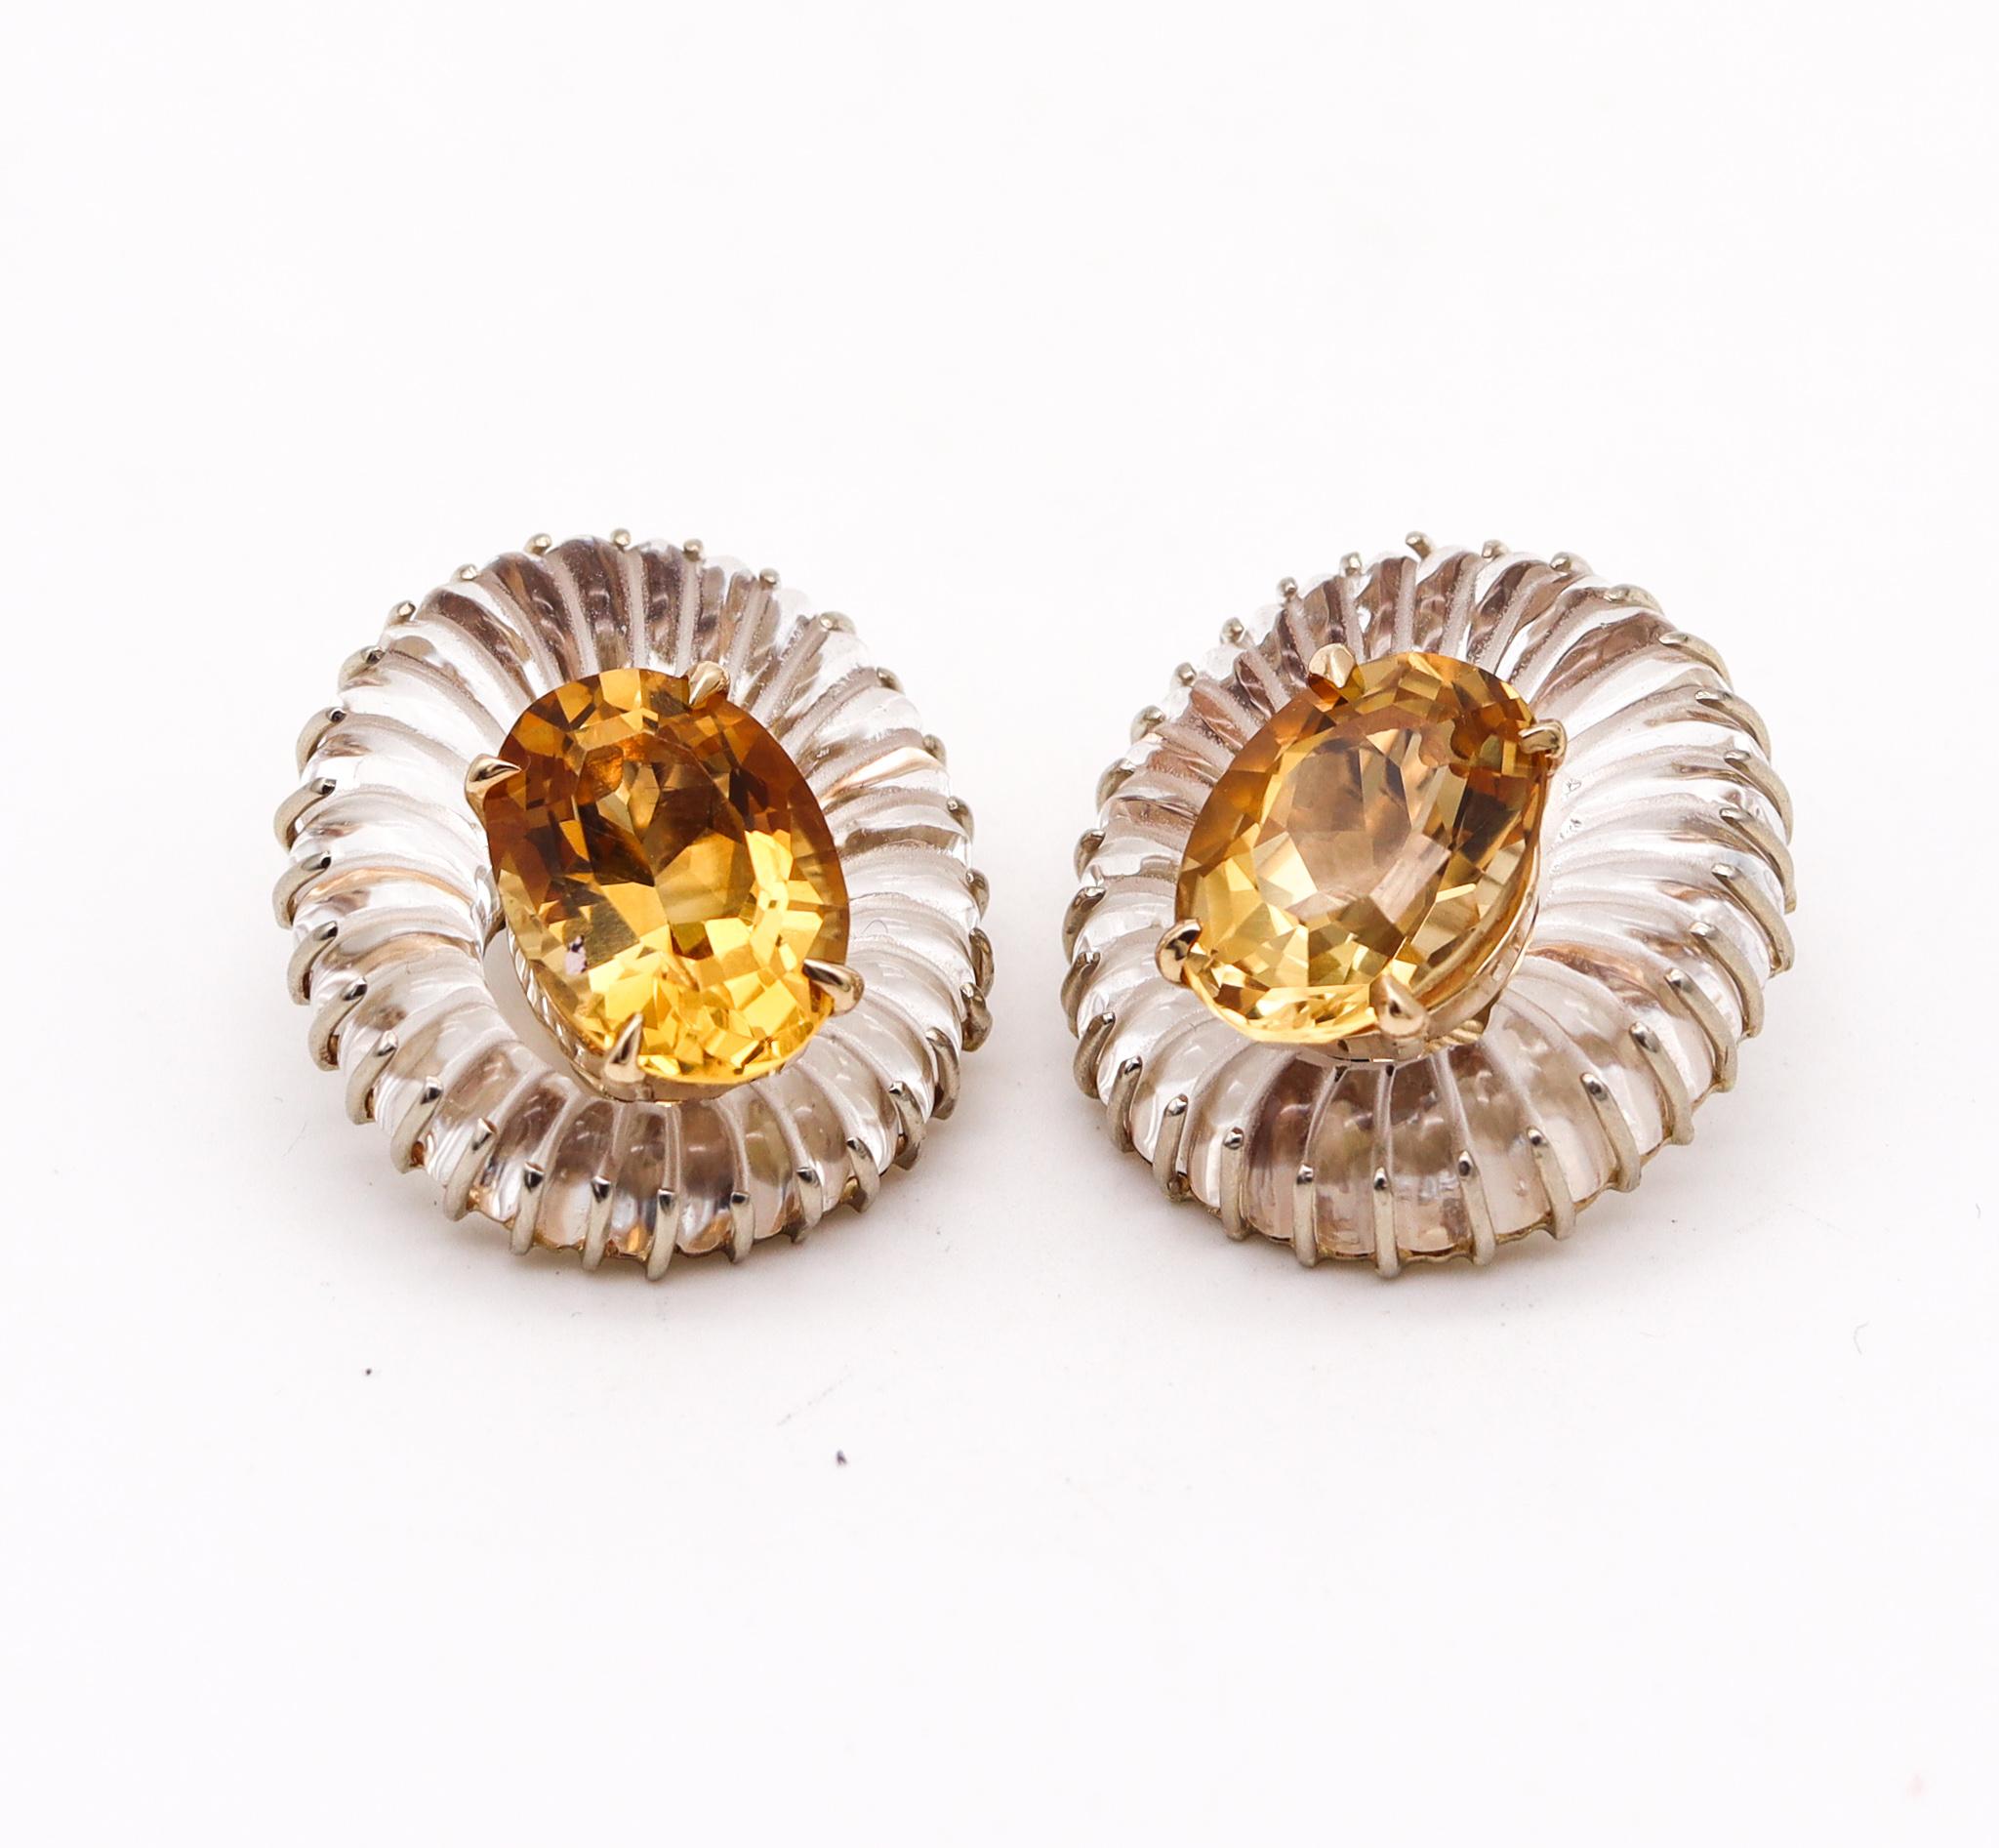 Fluted oval earrings designed by Seaman Schepps.

Gorgeous and very unusual vintage pair created in New York city at the Seaman Schepps atelier, back in the 1970. These oval clips earrings has been crafted in solid white and yellow gold of 14 karats